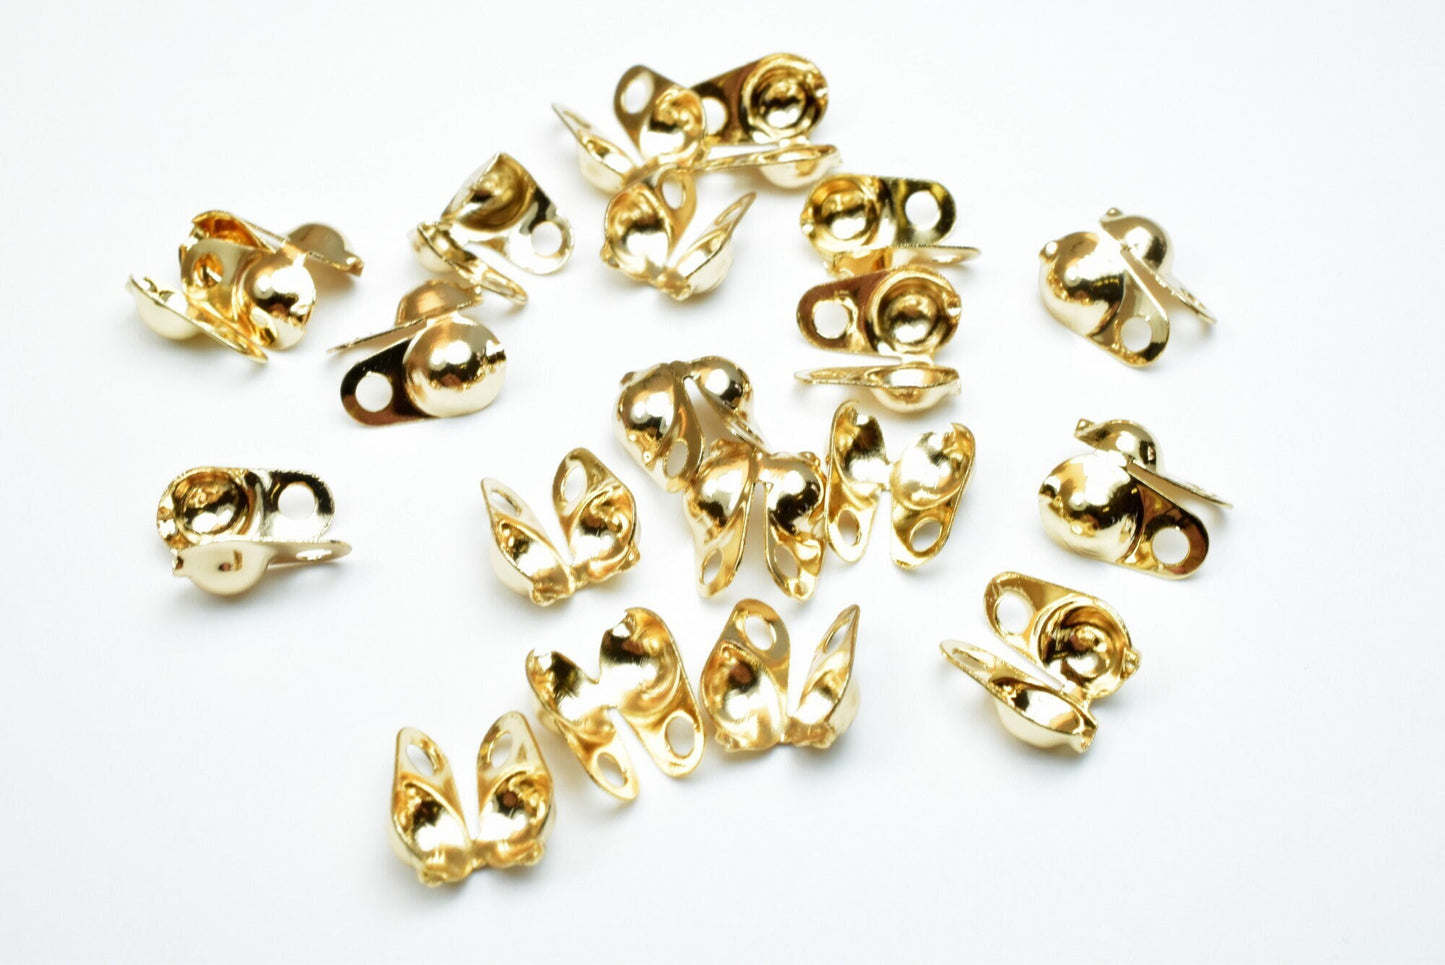 18k gold filled EP ball chain crimp cover end tip beads size 1.5mm, 2.4mm, 3.2mm, 4mm for jewelry making findings